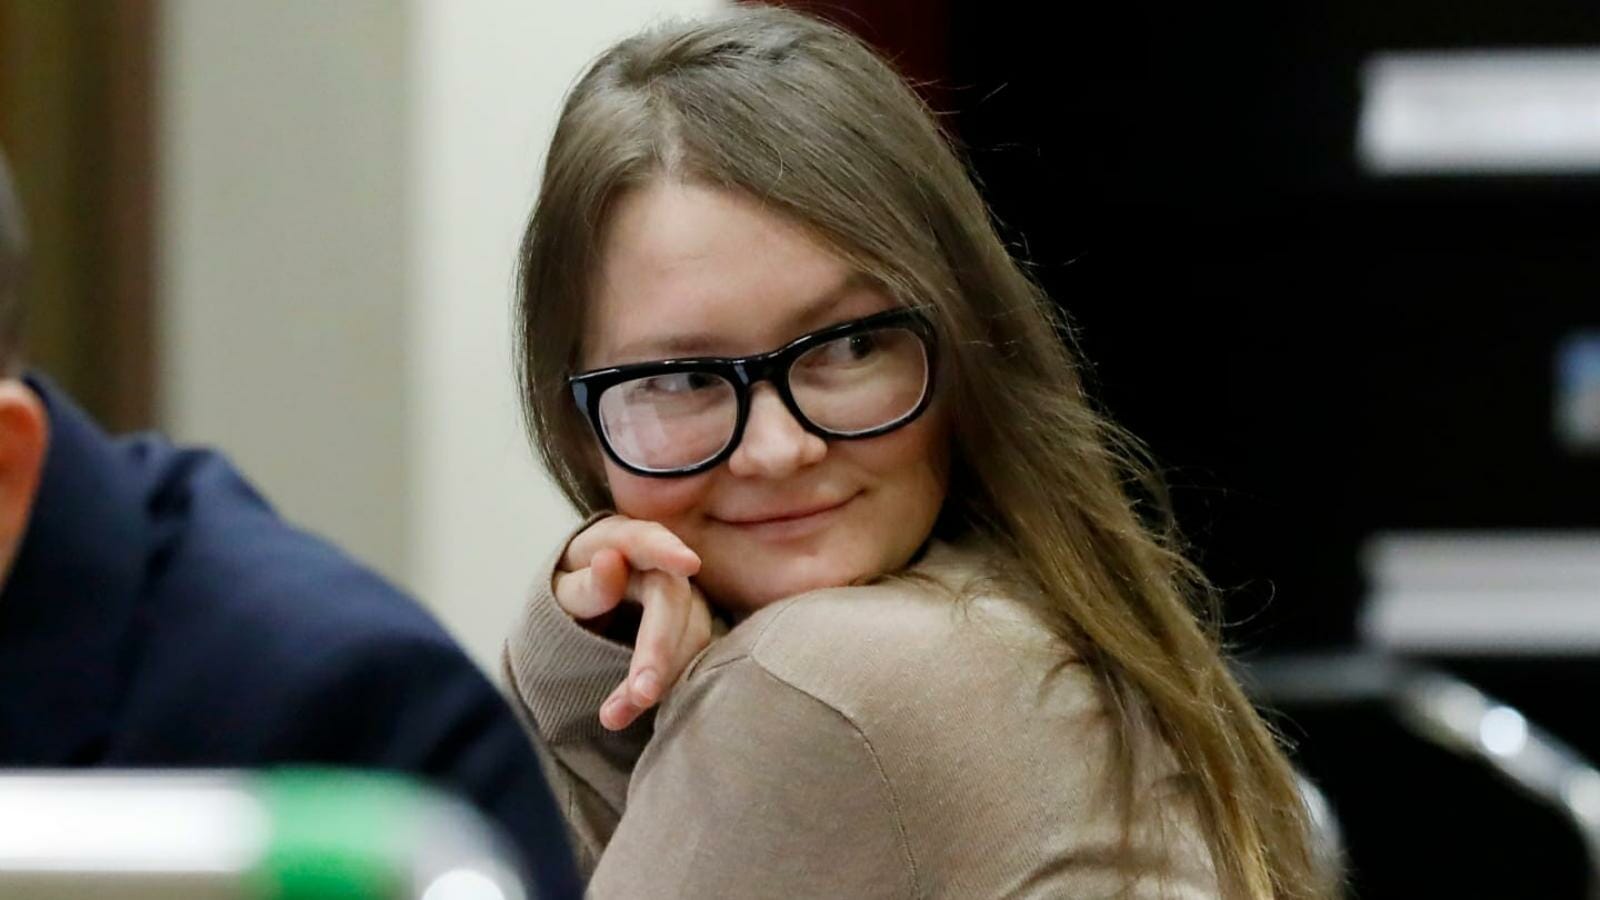 The Real Anna Sorokin who posed as Anna Delvey